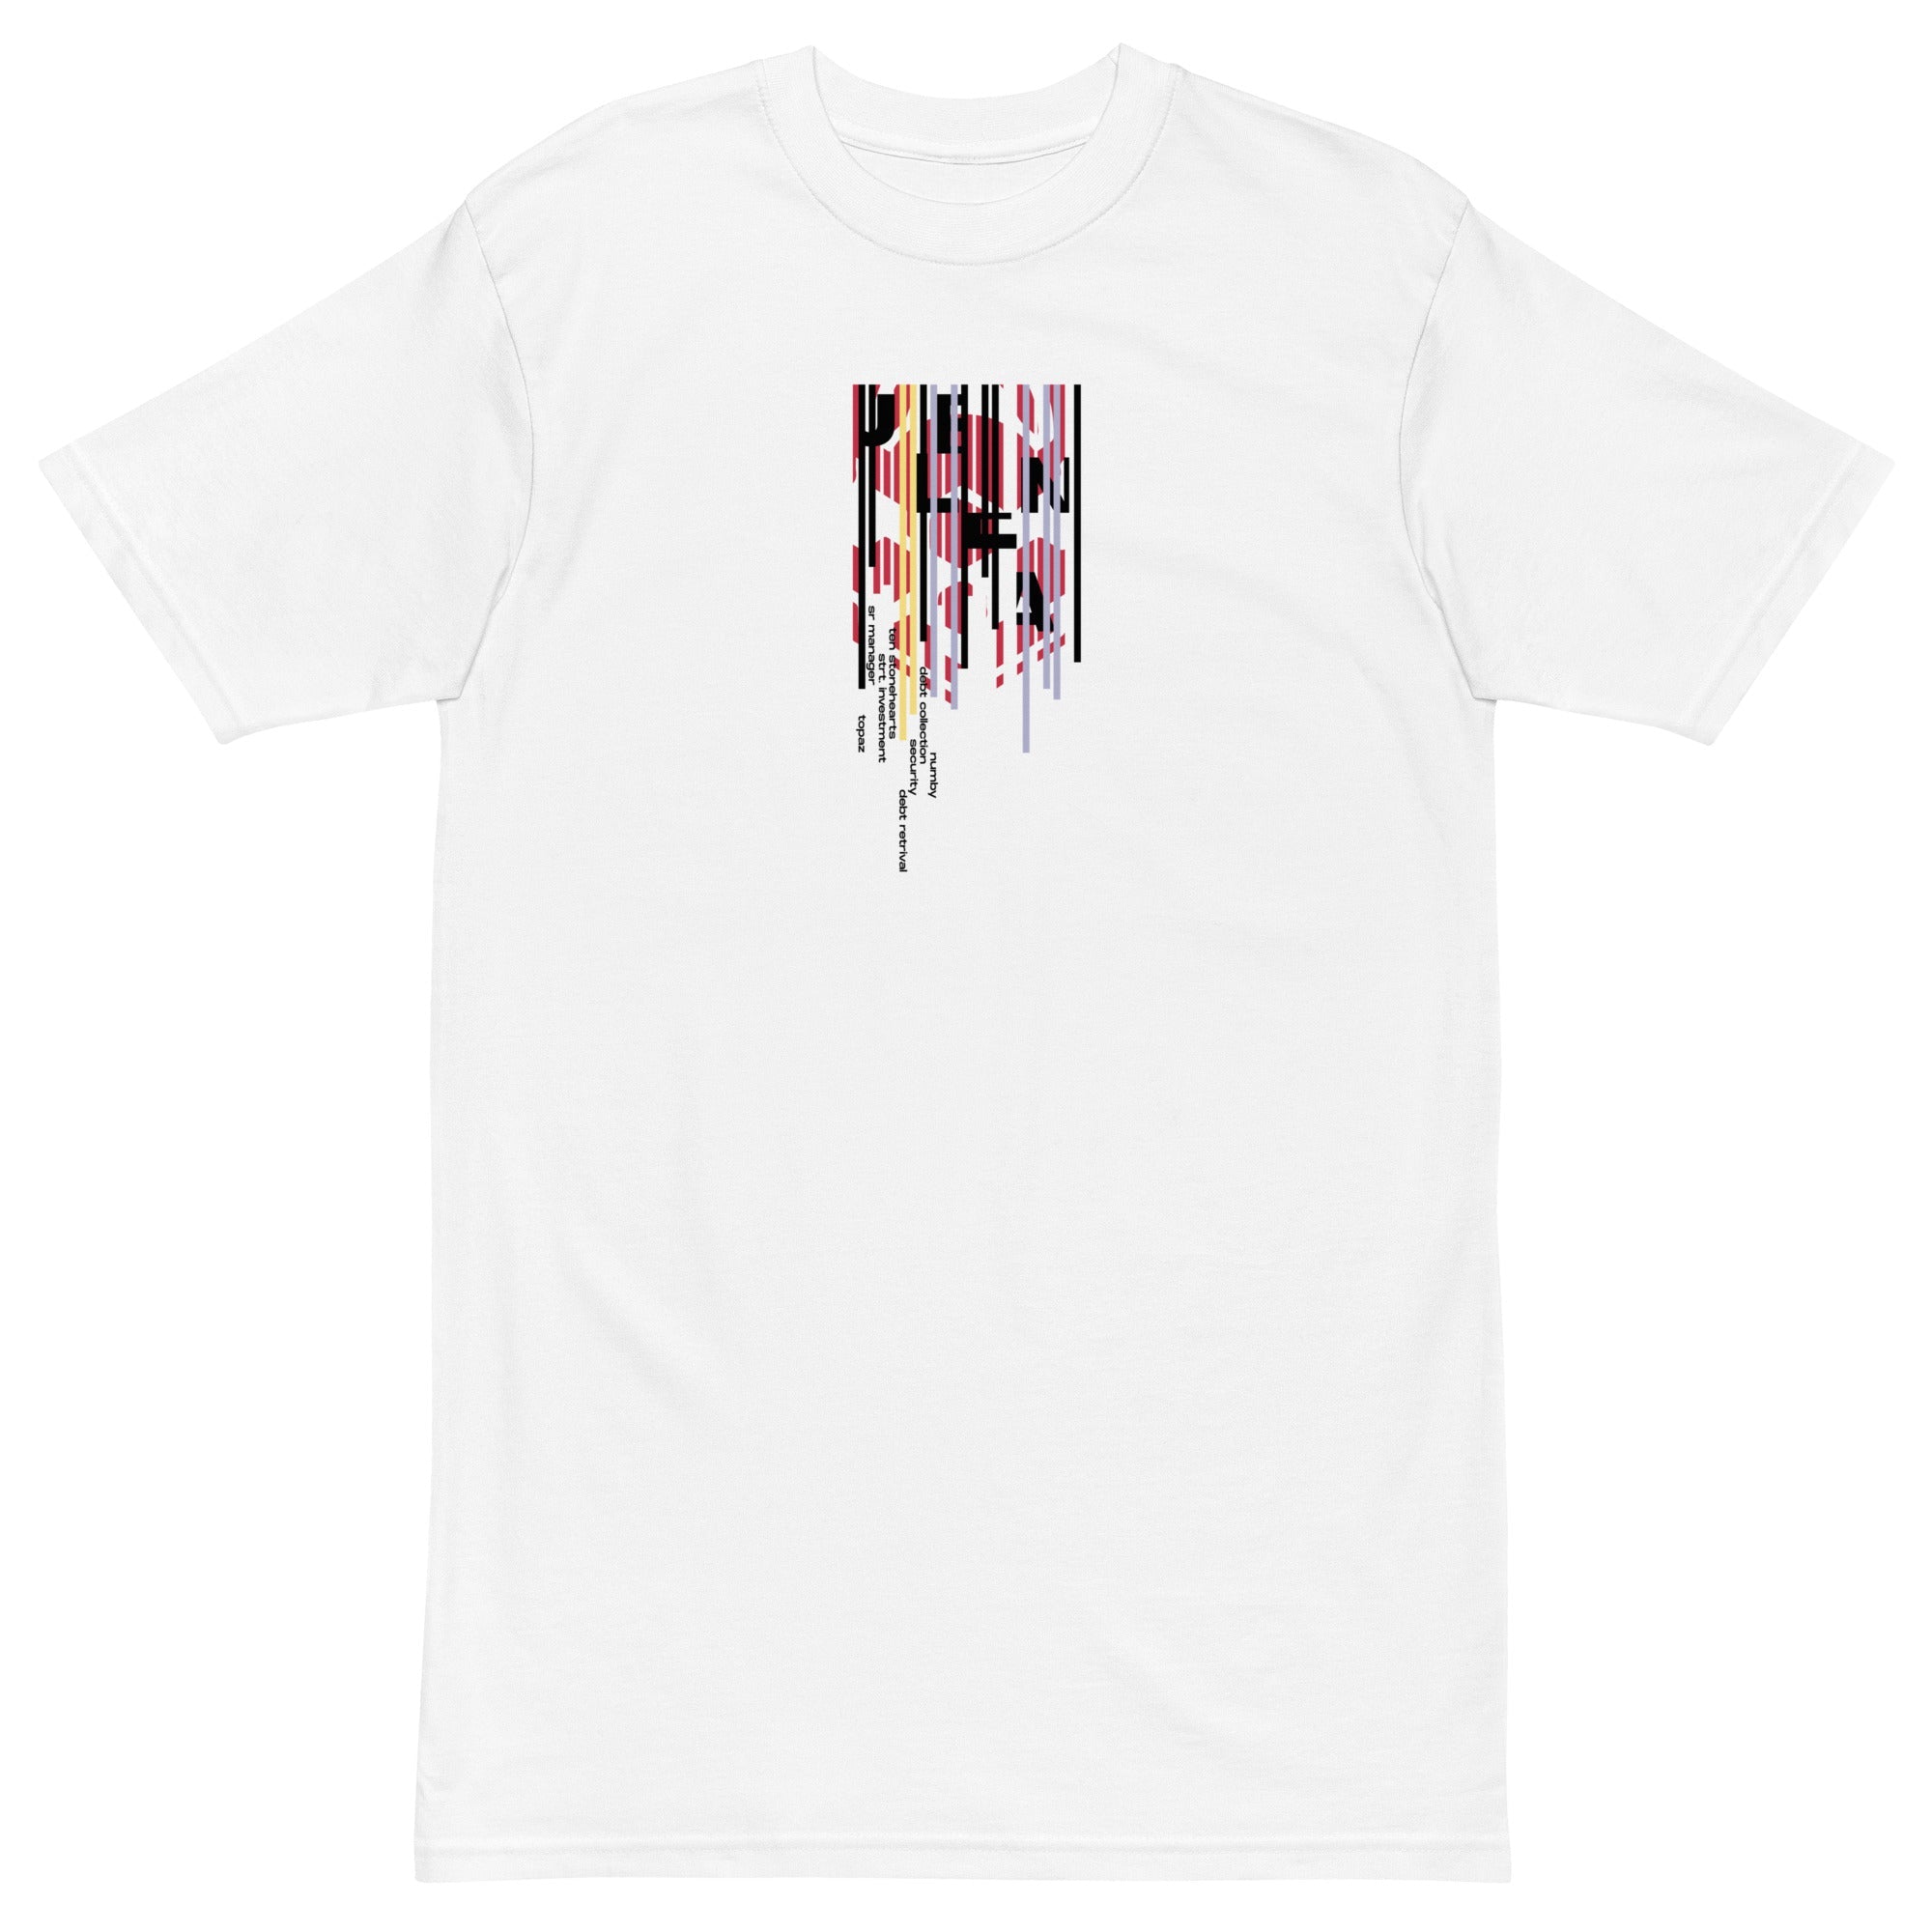 SPECIAL DEBTS • t-shirt - Jackler - anime-inspired streetwear - anime clothing